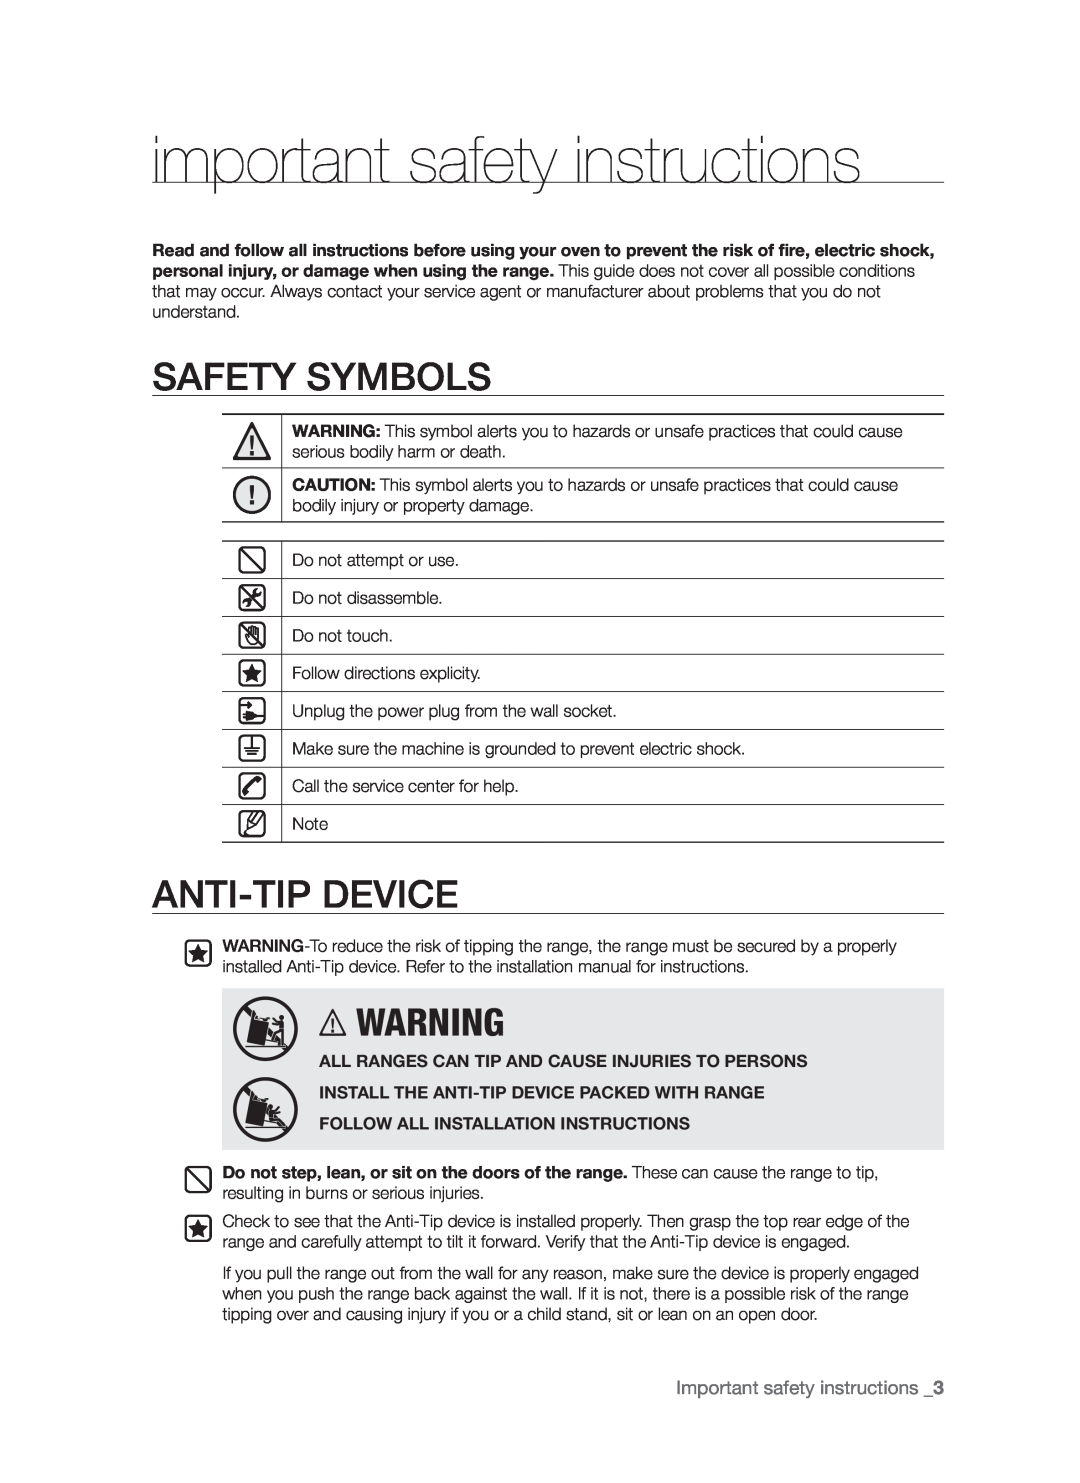 Samsung FCQ321HTUW important safety instructions, Safety Symbols, Anti-Tip Device, Important safety instructions  